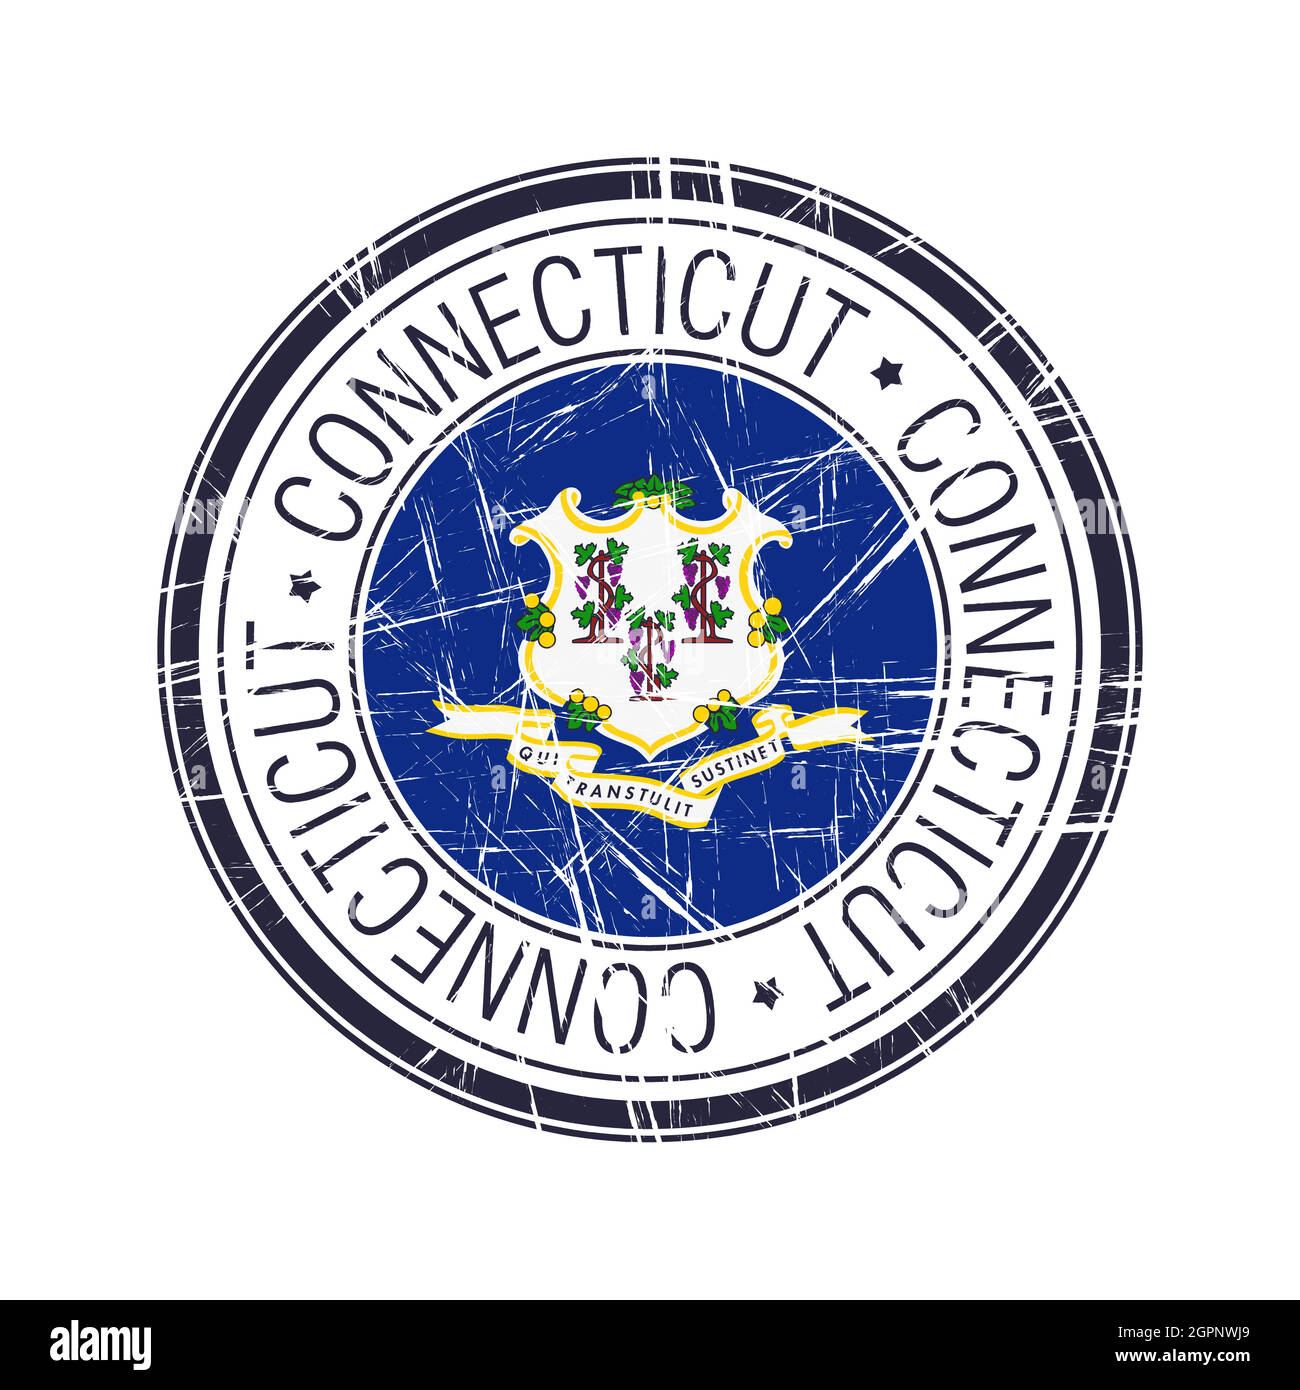 Connecticut rubber stamp Stock Vector